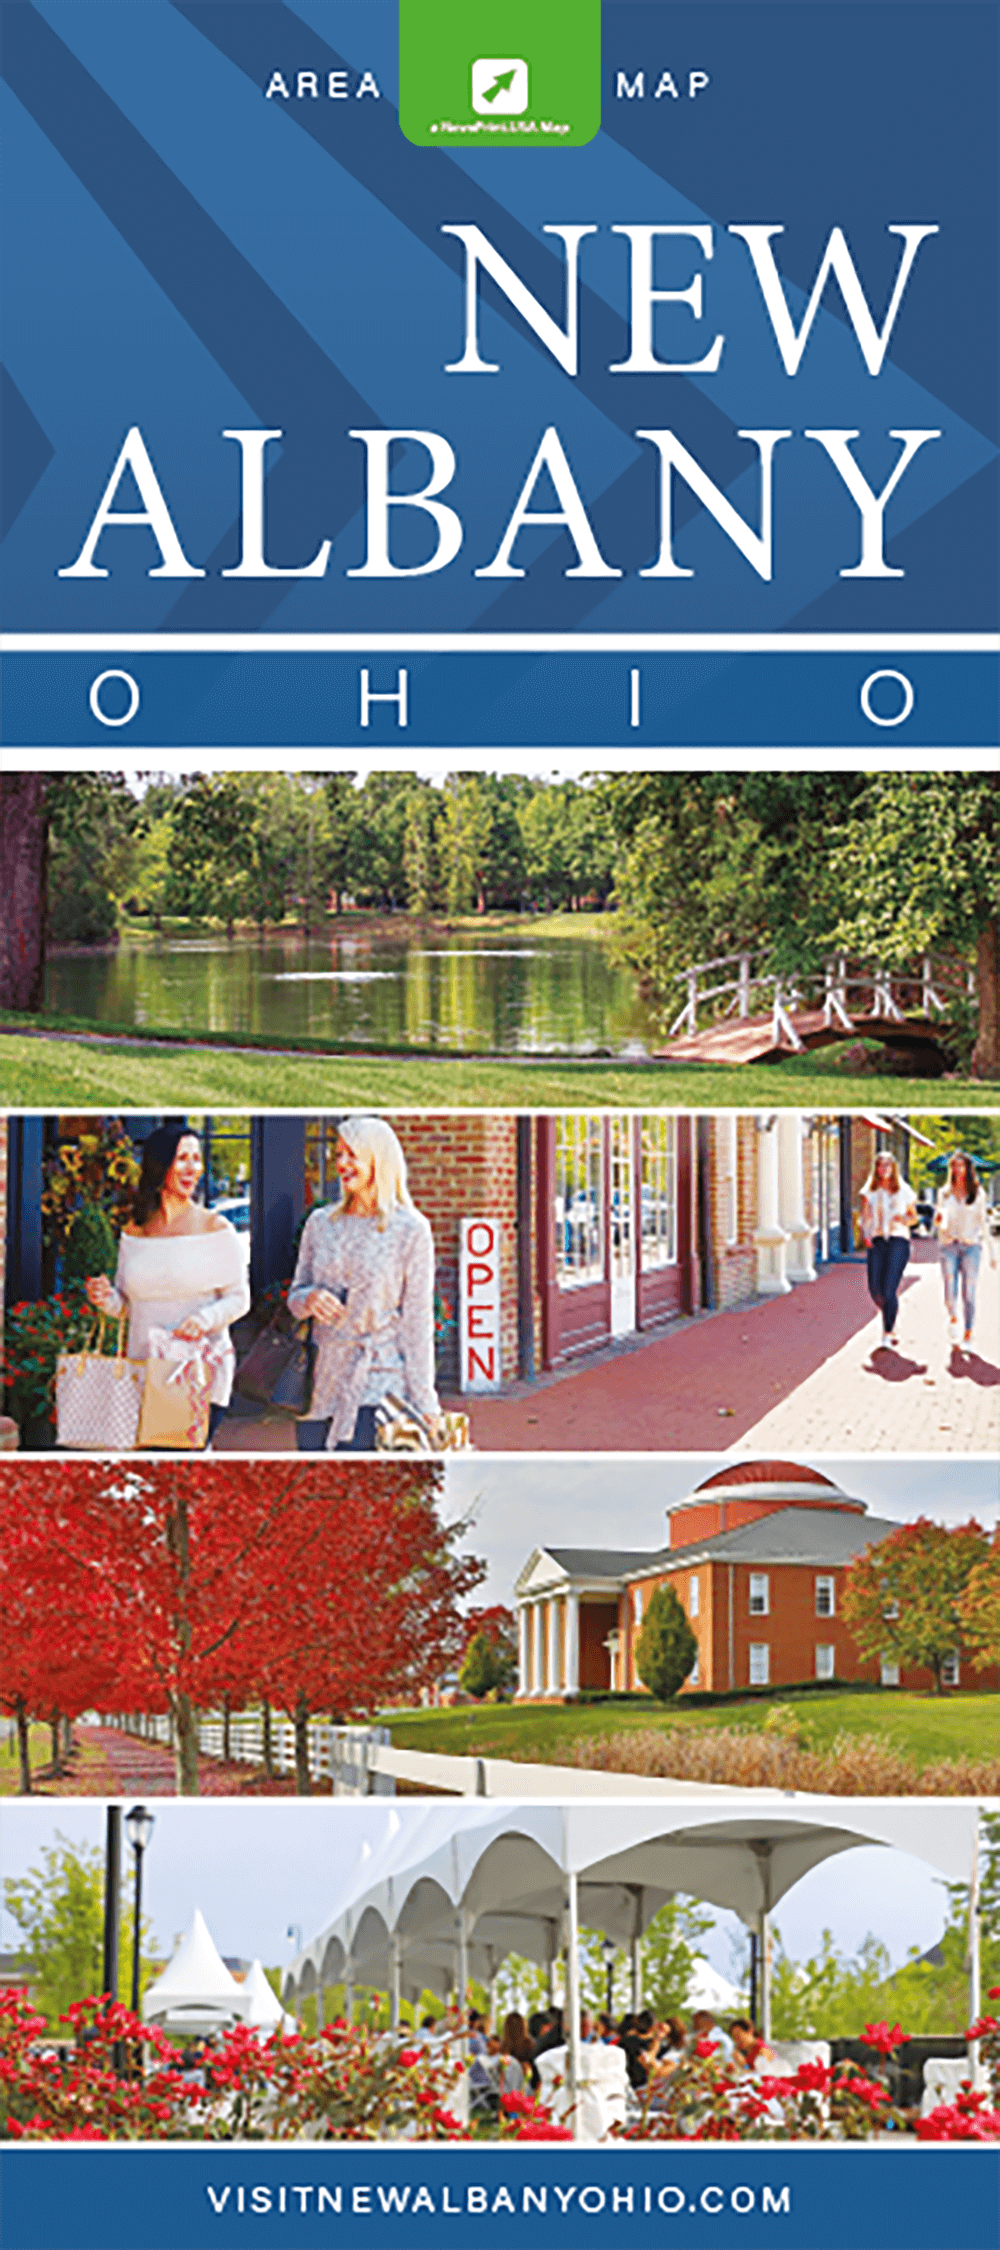 New Albany MAP 2020 Cover_THUMB